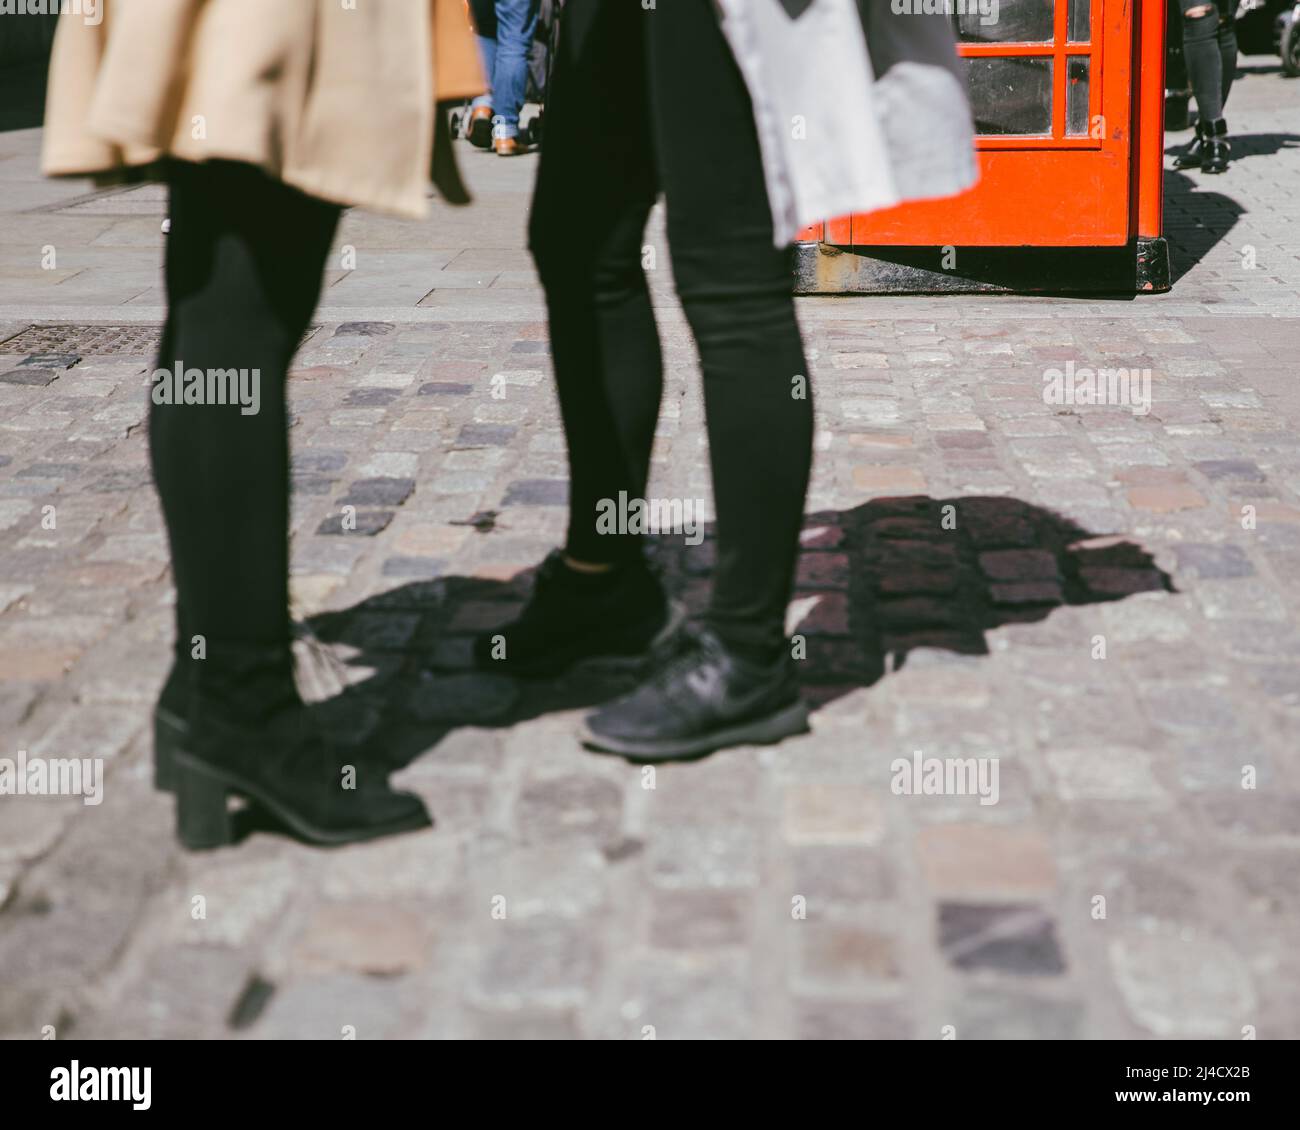 Covent Garden, London, UK - April 12, 2016: Two people (waist down) can be seen standing/interacting on a cobbled London street. Stock Photo